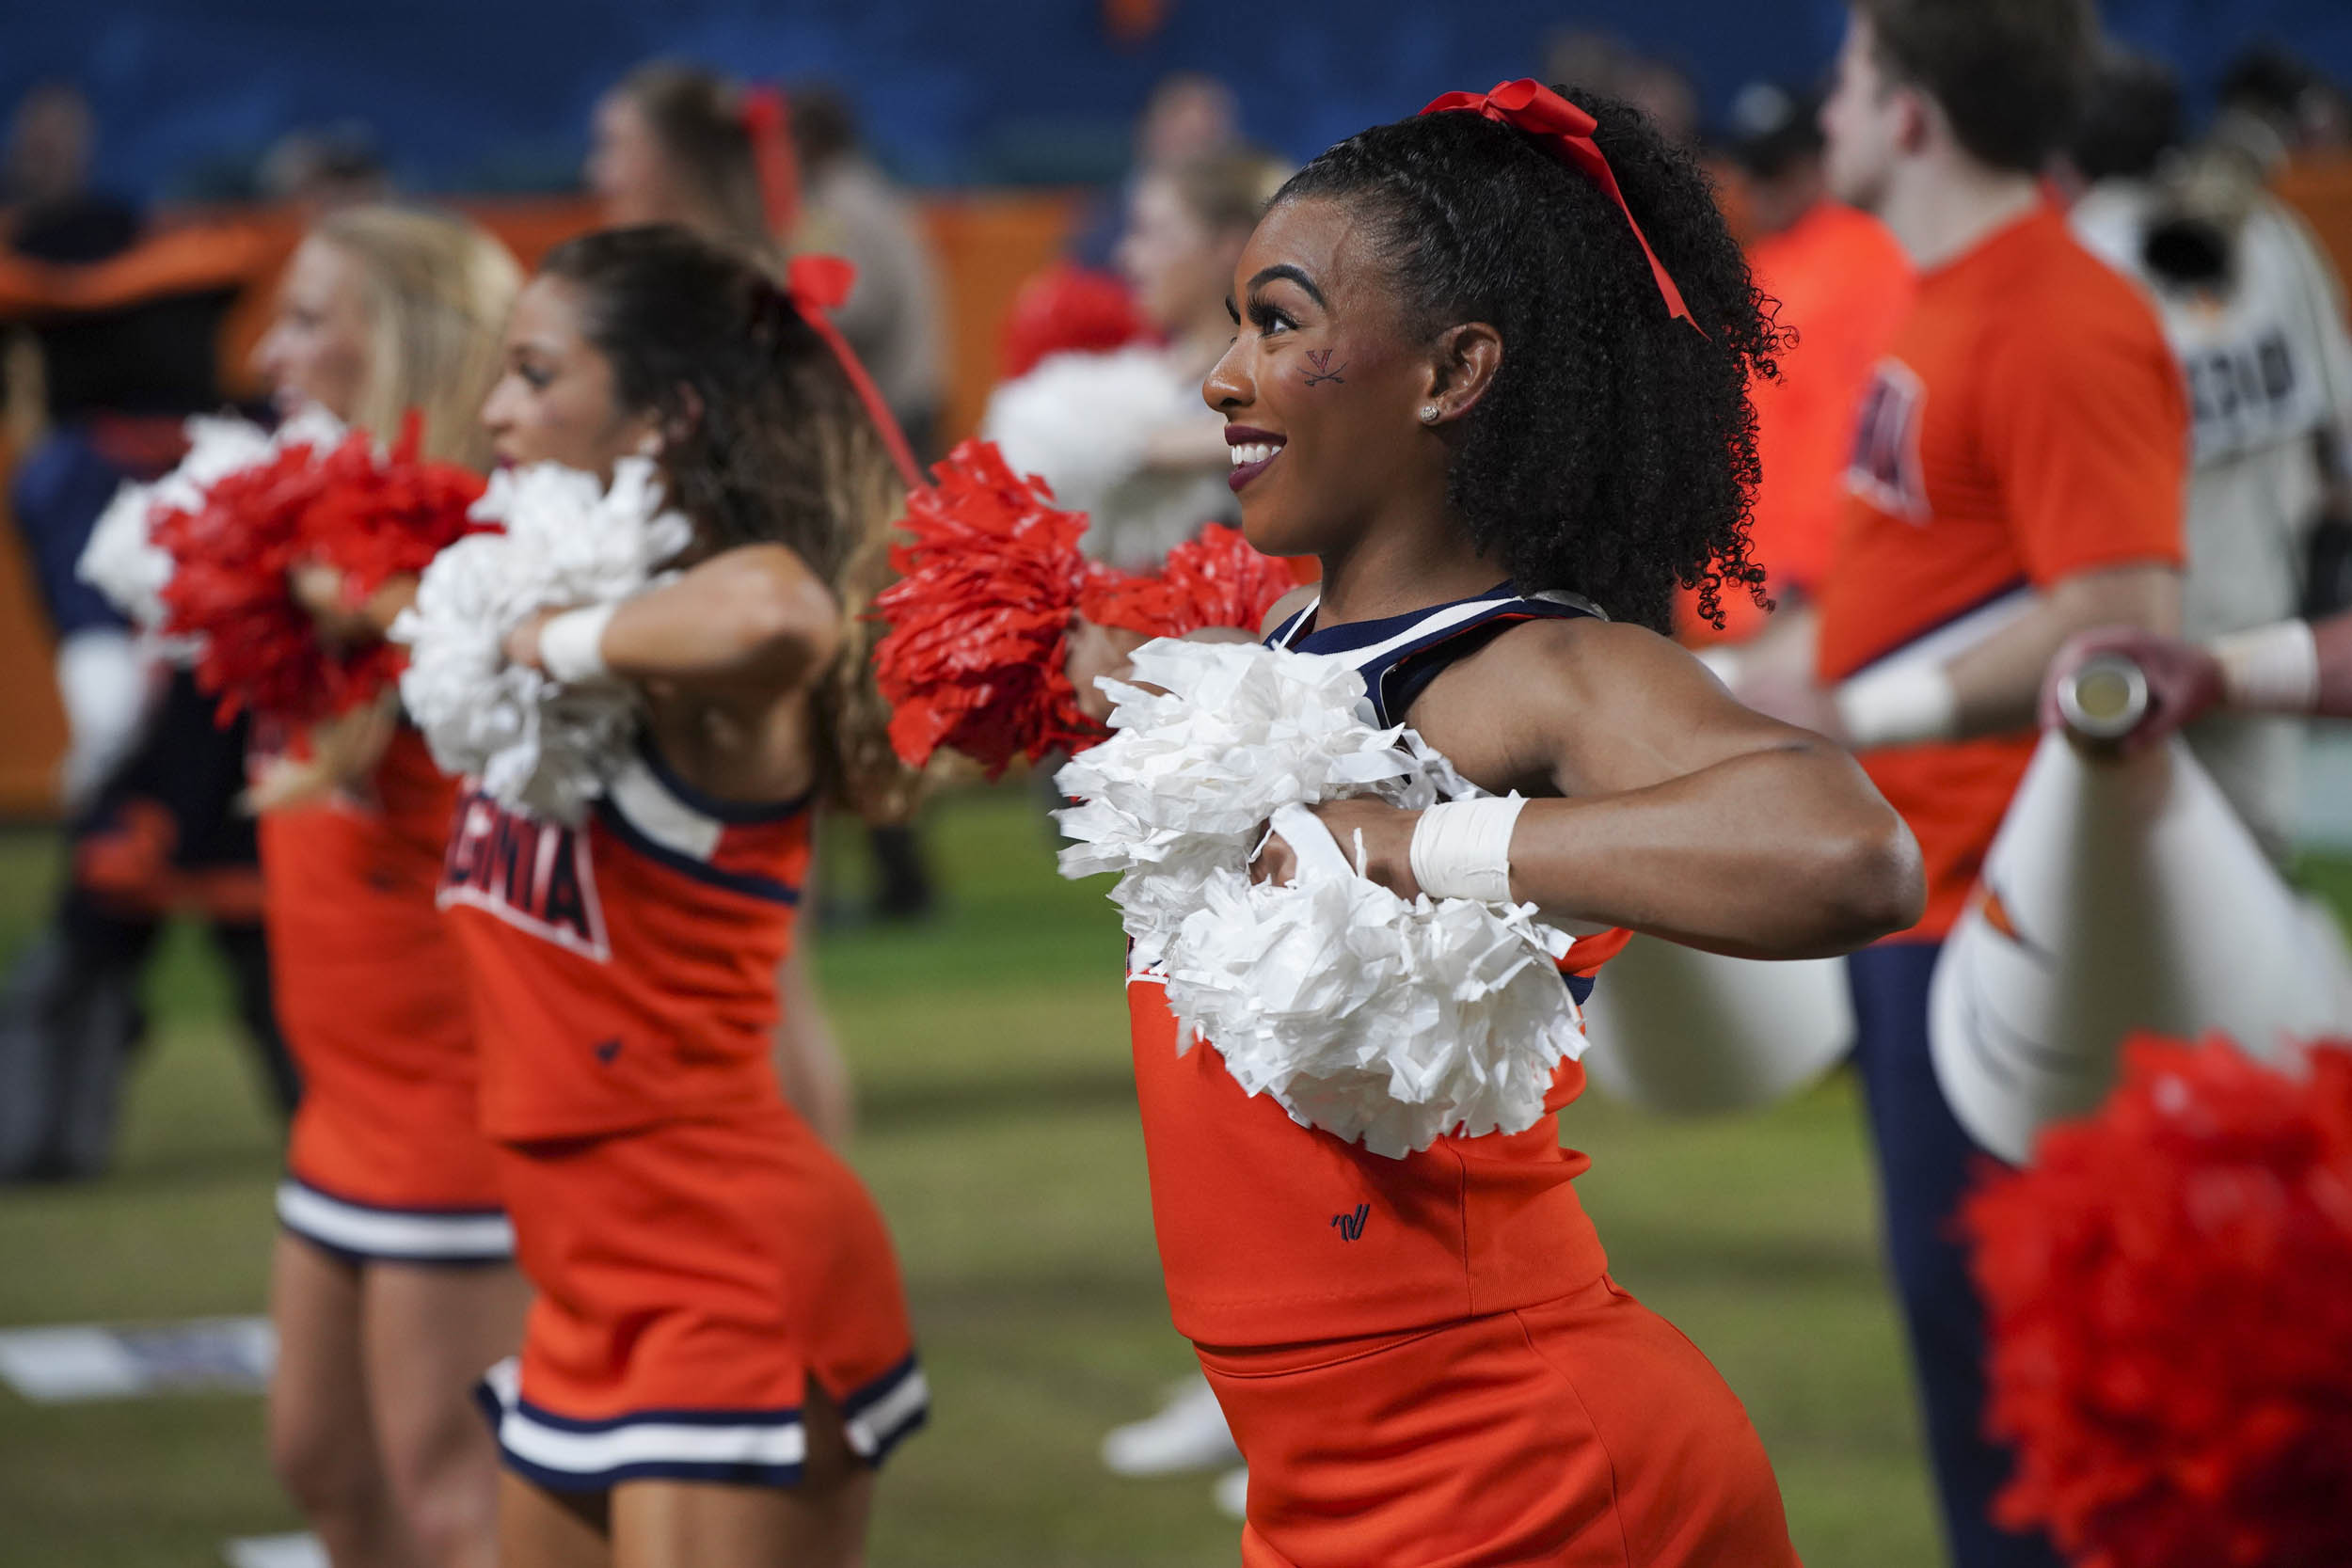 UVA's cheerleaders cheering on the side lines during the football game